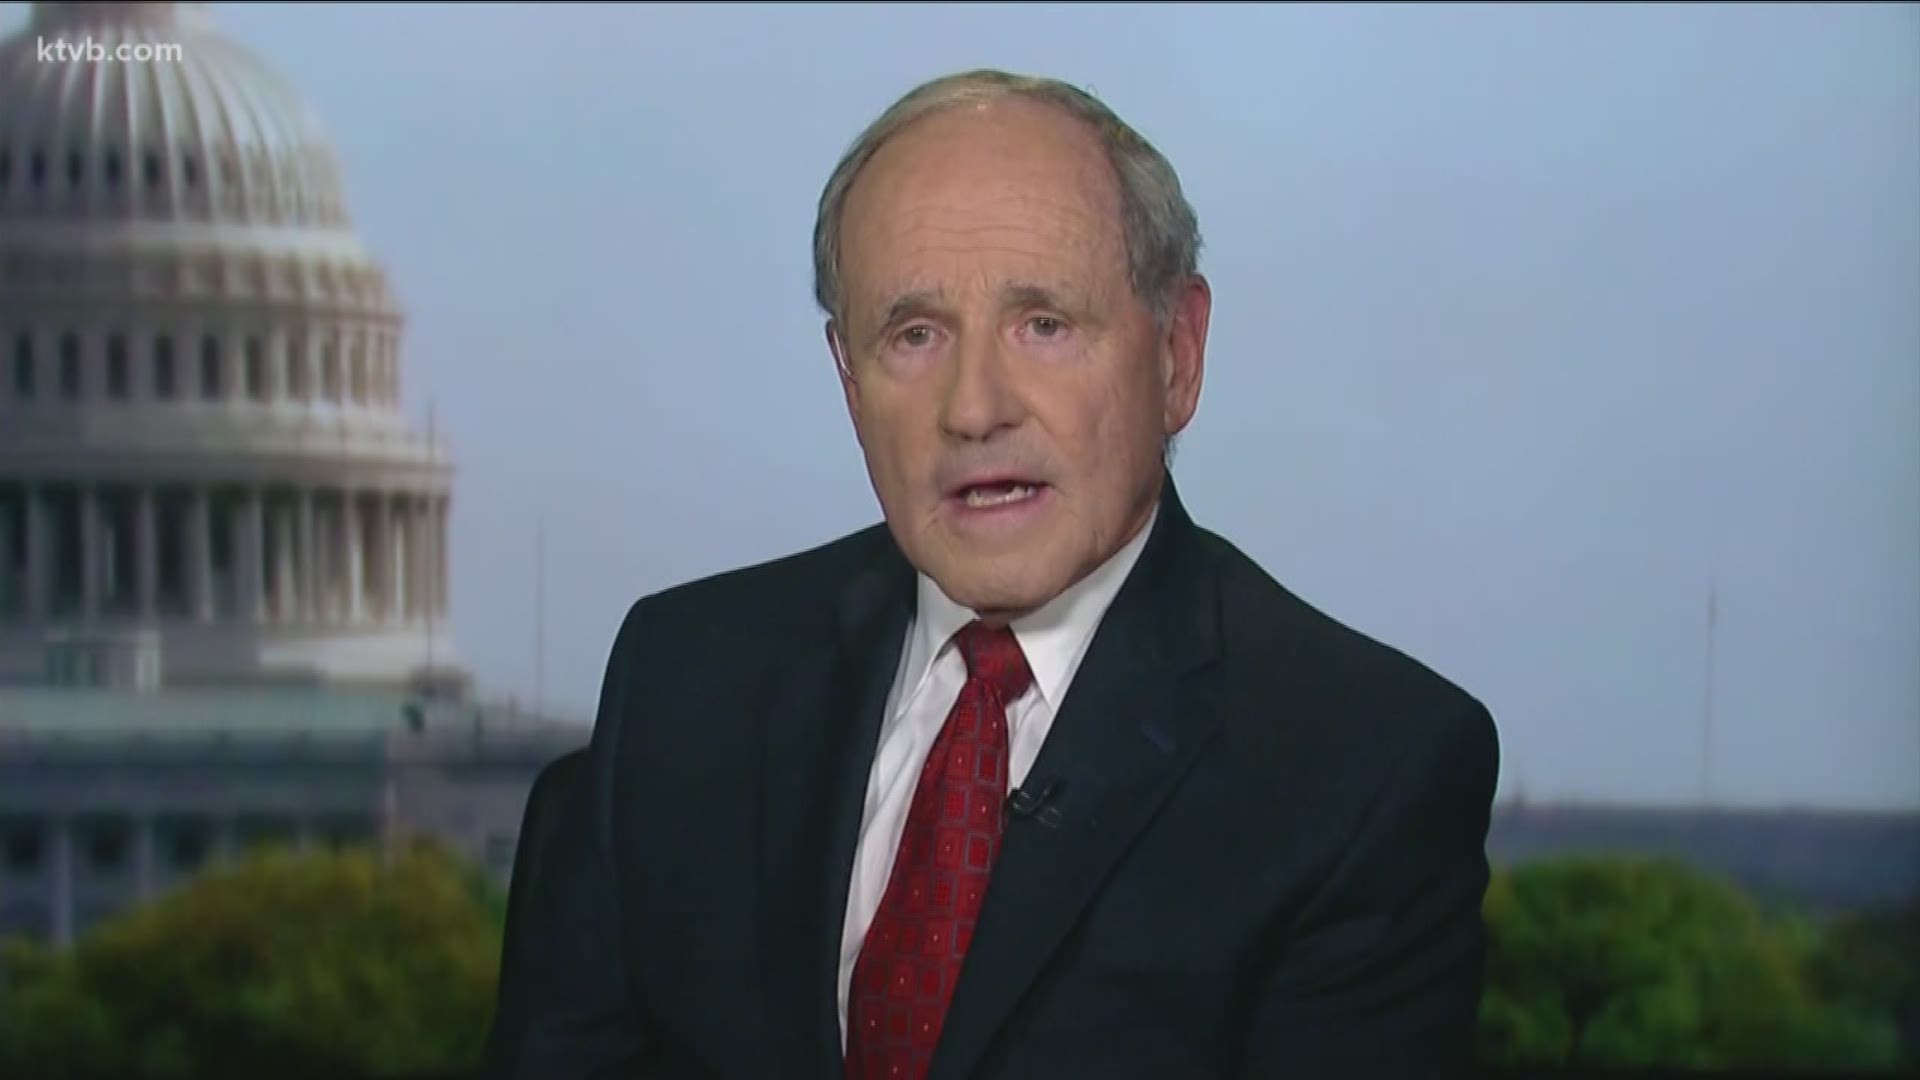 Risch was answering questions at a business roundtable event in Nampa, when the reporter began asking about President Trump's recent comments on Ukraine and China.